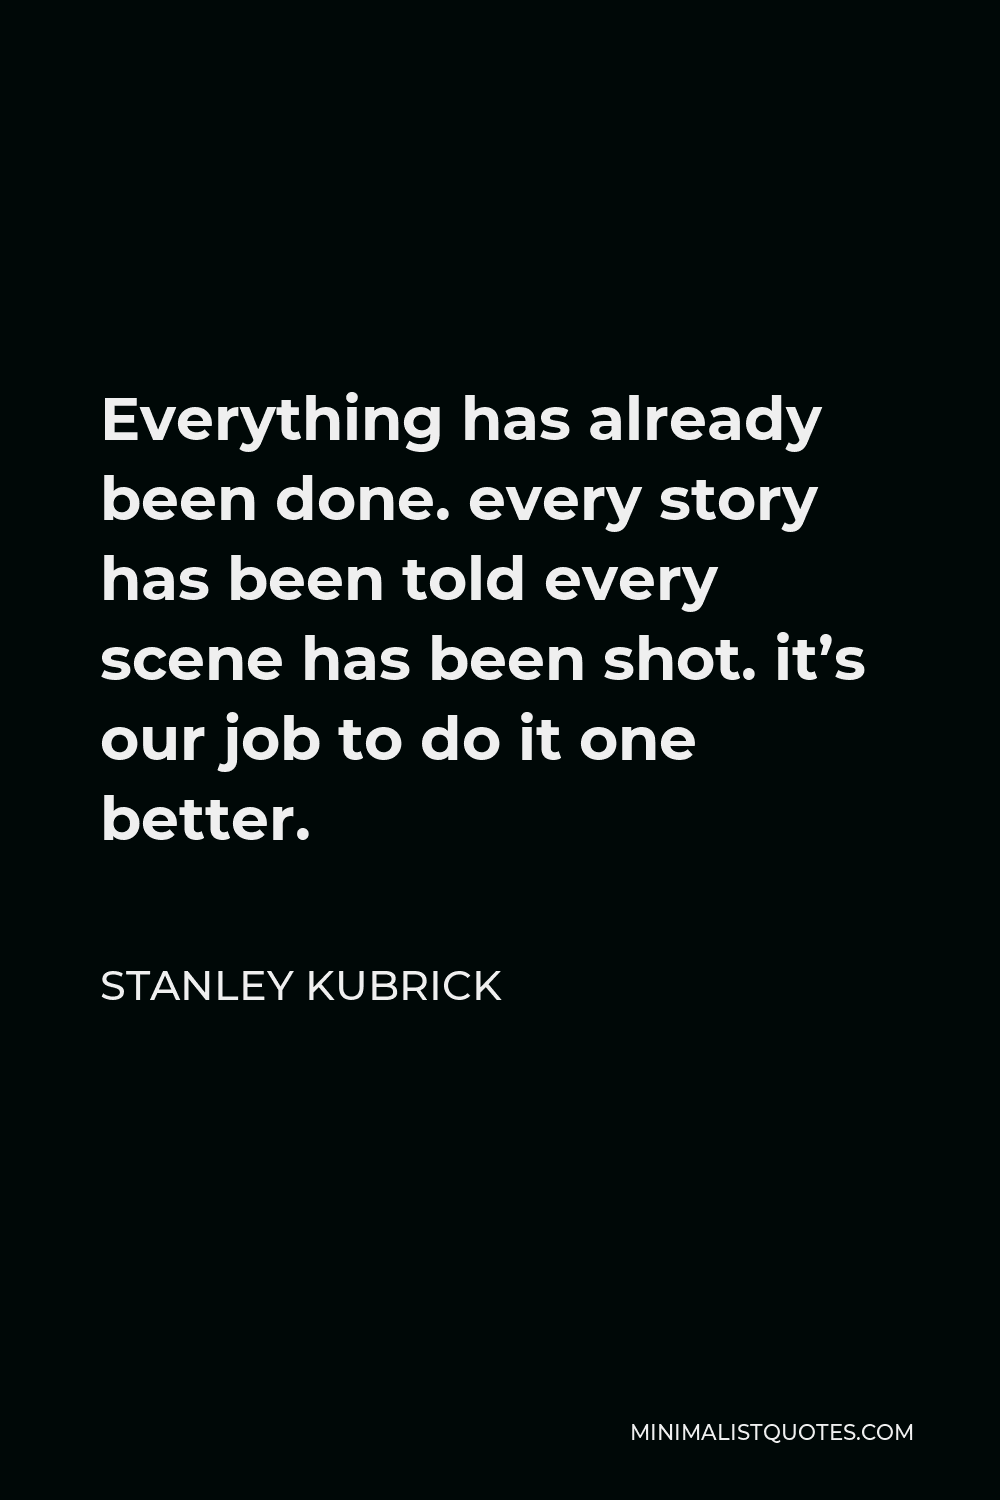 Stanley Kubrick Quote Everything has already been done. every story